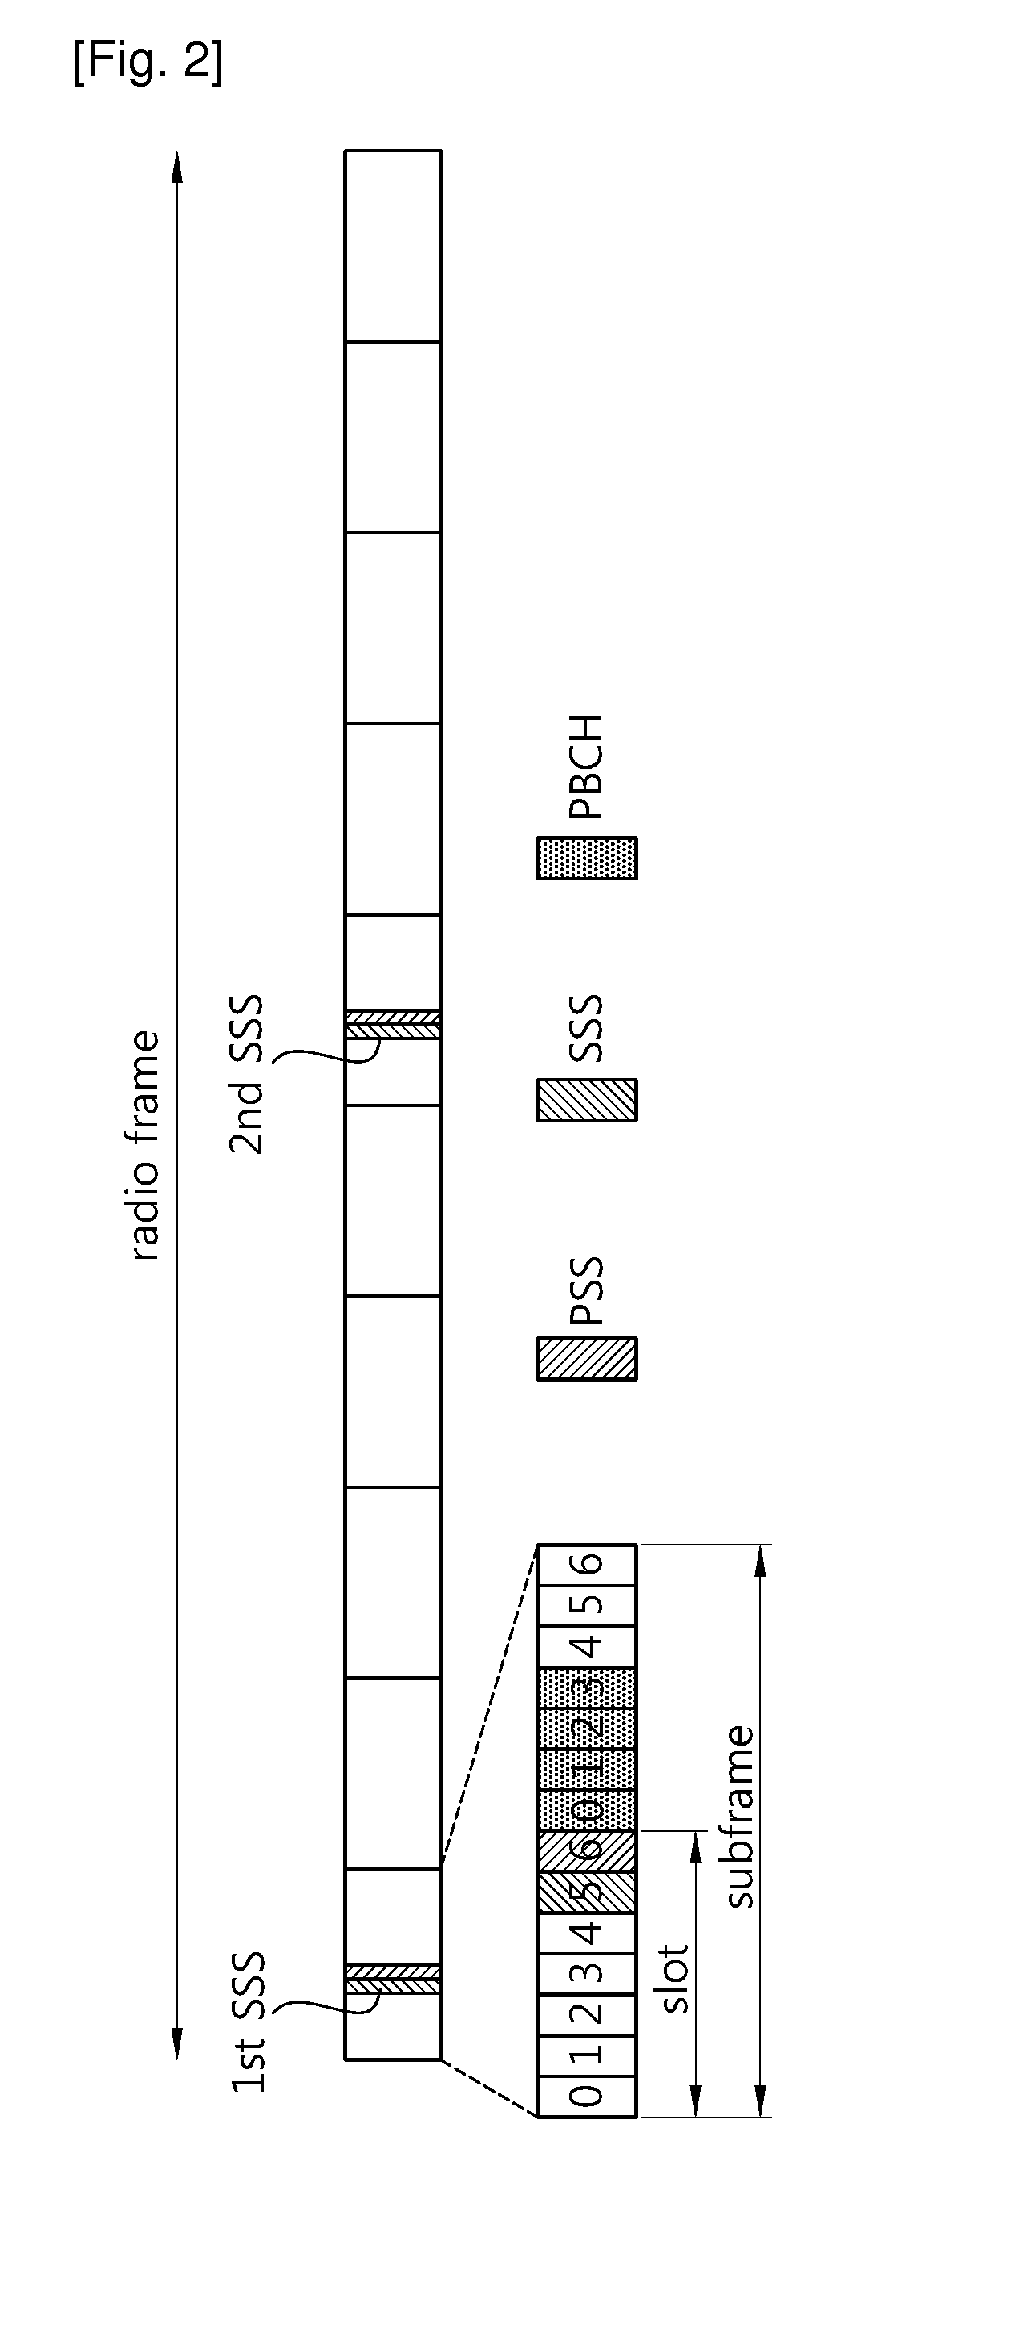 Method and apparatus for supporting multiple carriers